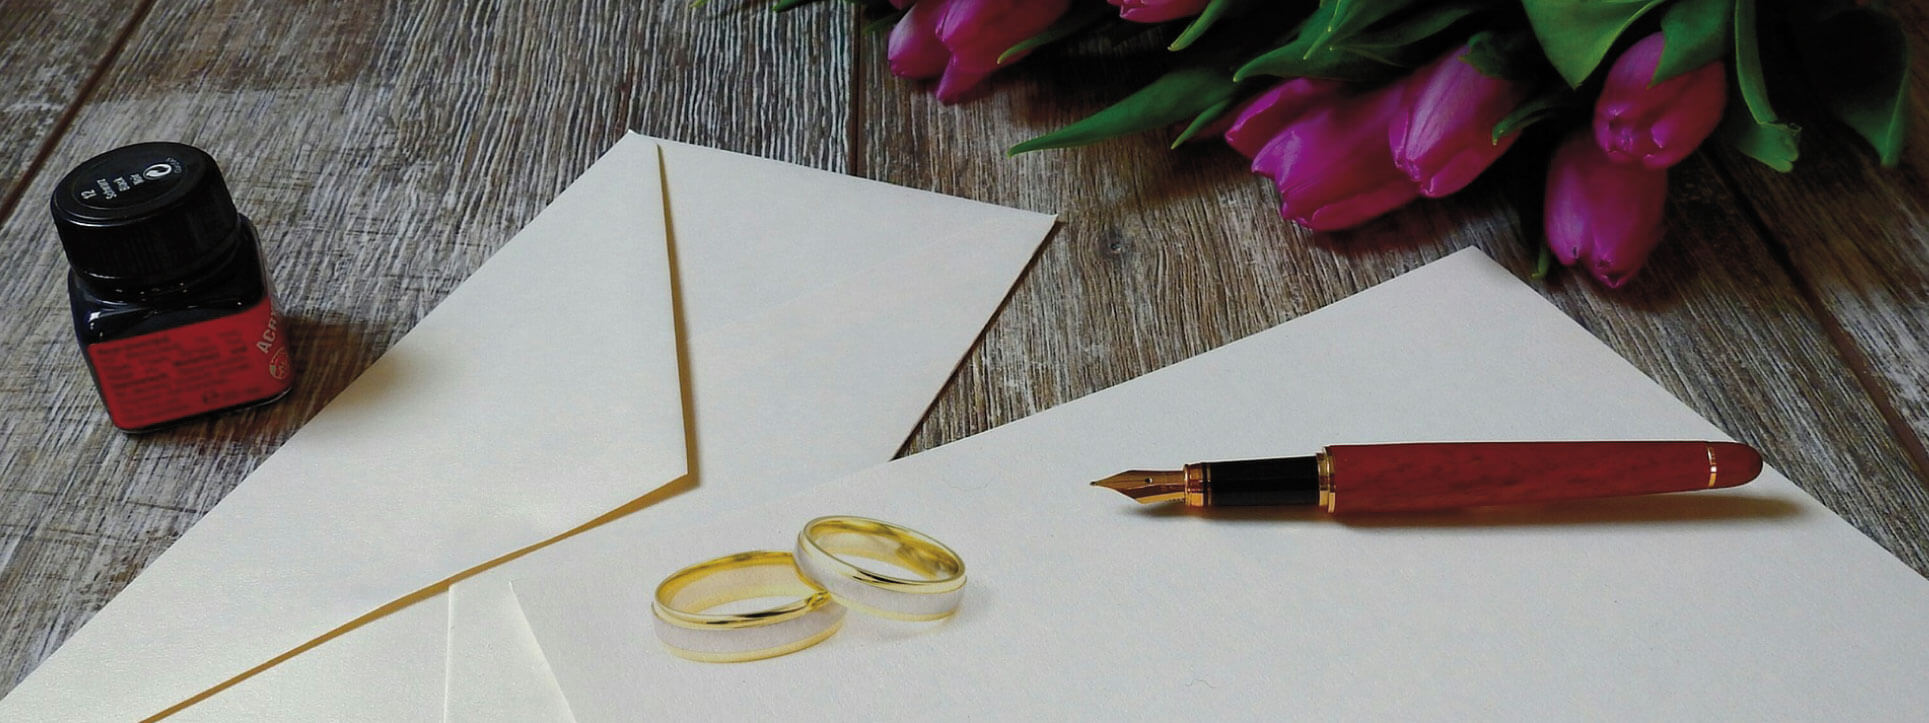 Why Wedding Invitation Cards Are Still Important